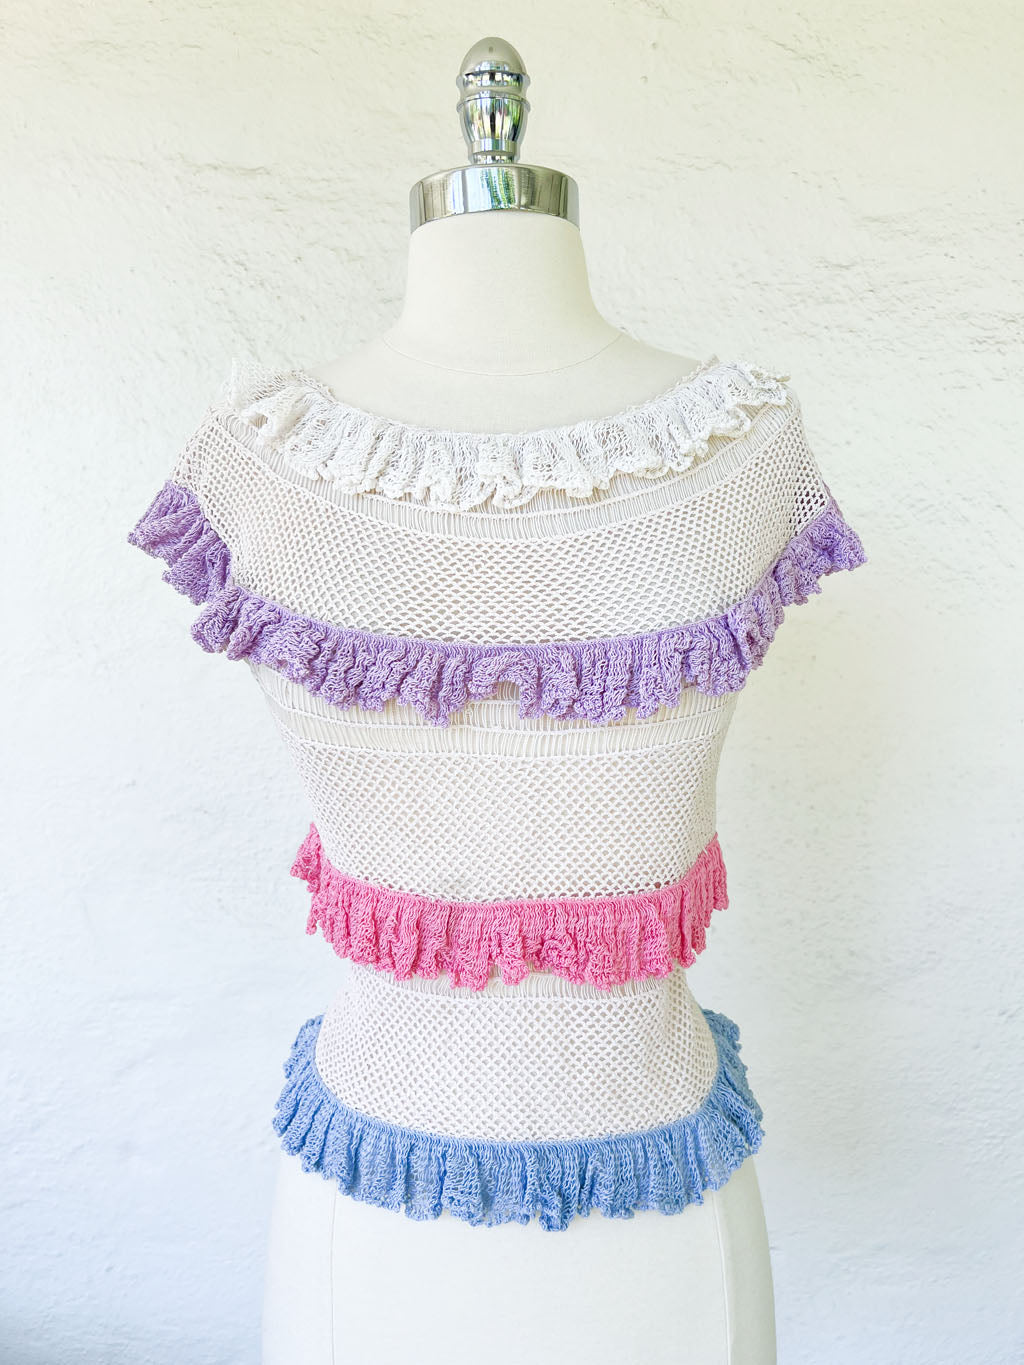 Vintage 1970s does 1930s Hand Knit Crochet Fishnet Blouse in Unicorn Pastels! Size XS to S